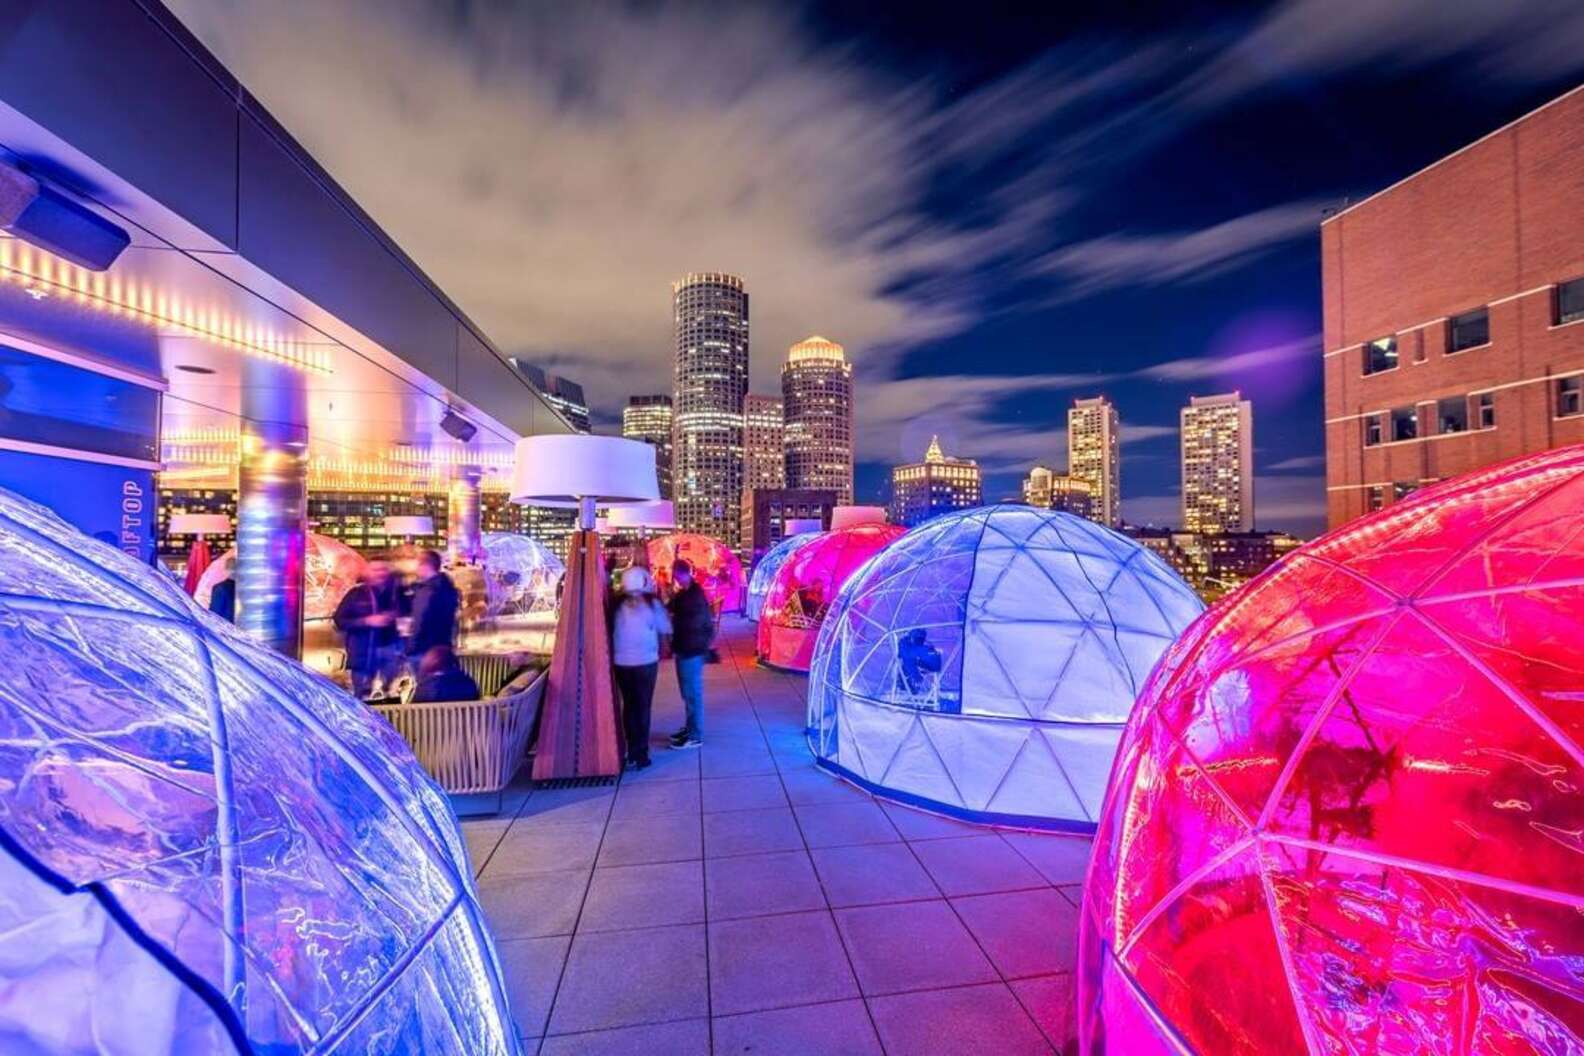 Boston Winter Events Calendar Everything You Need to Do This Winter